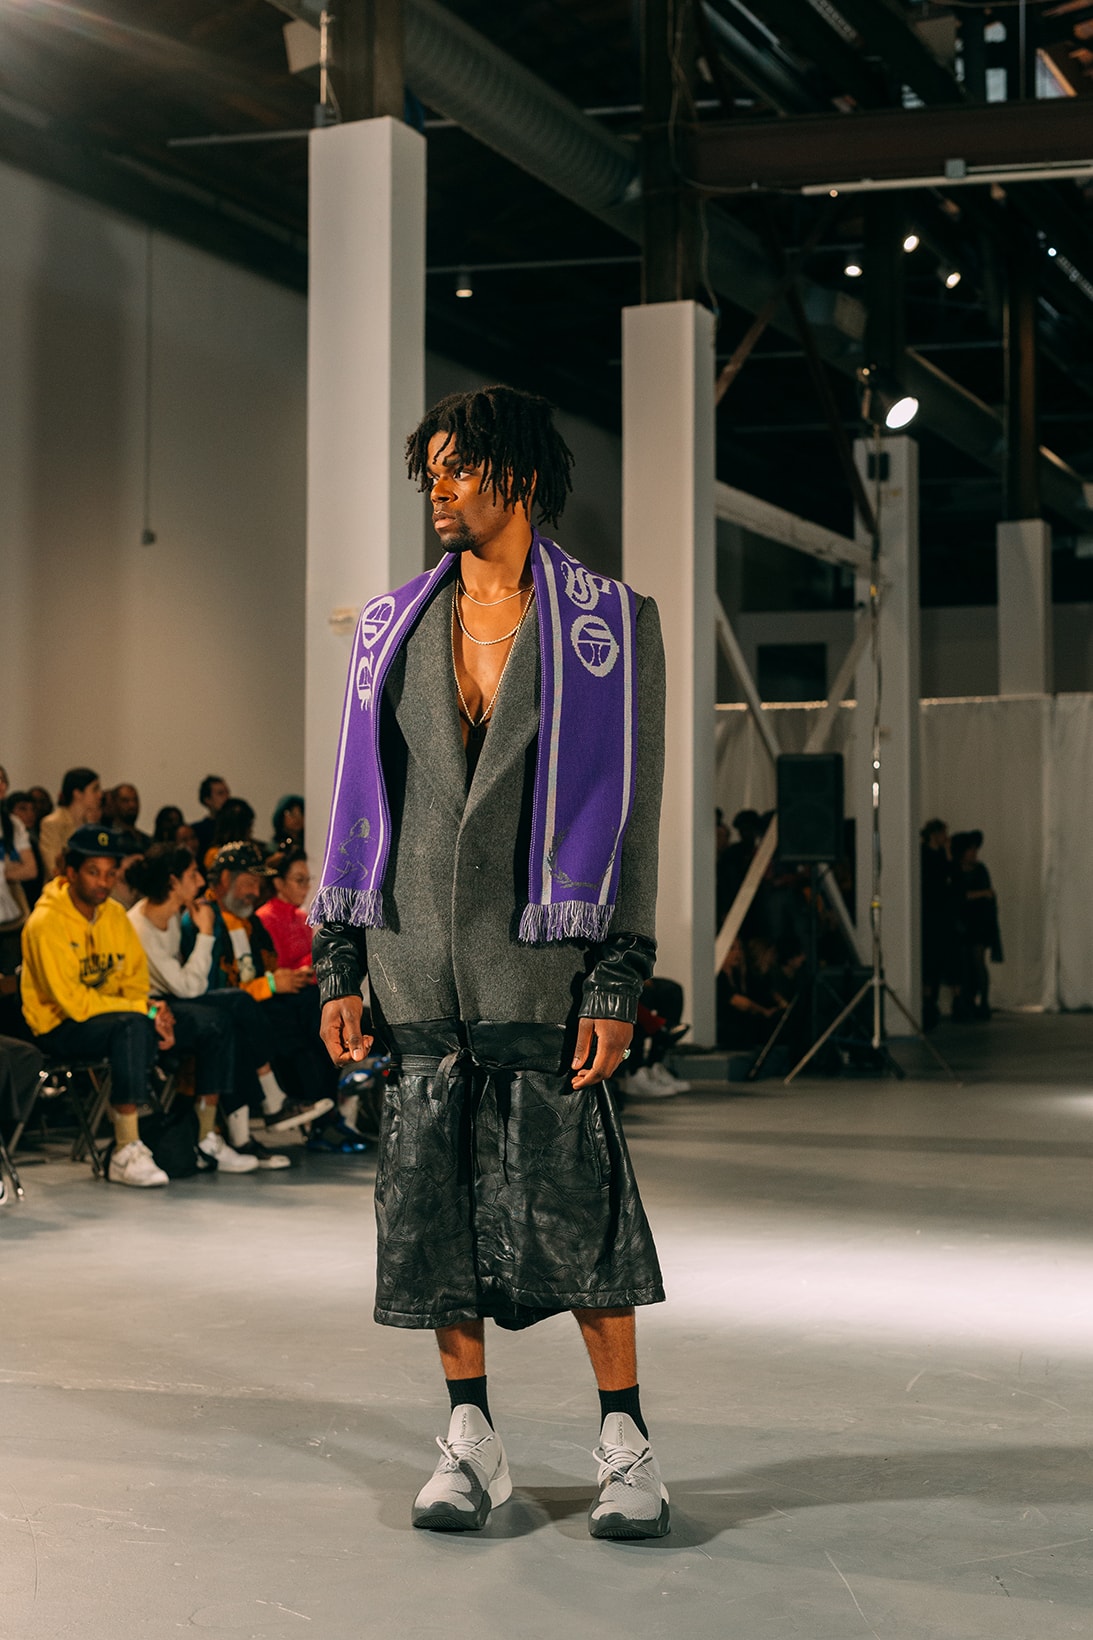 no sesso pierre davis arin hayes autumn randolph fall winter collection los angeles runway show jacket sneakers